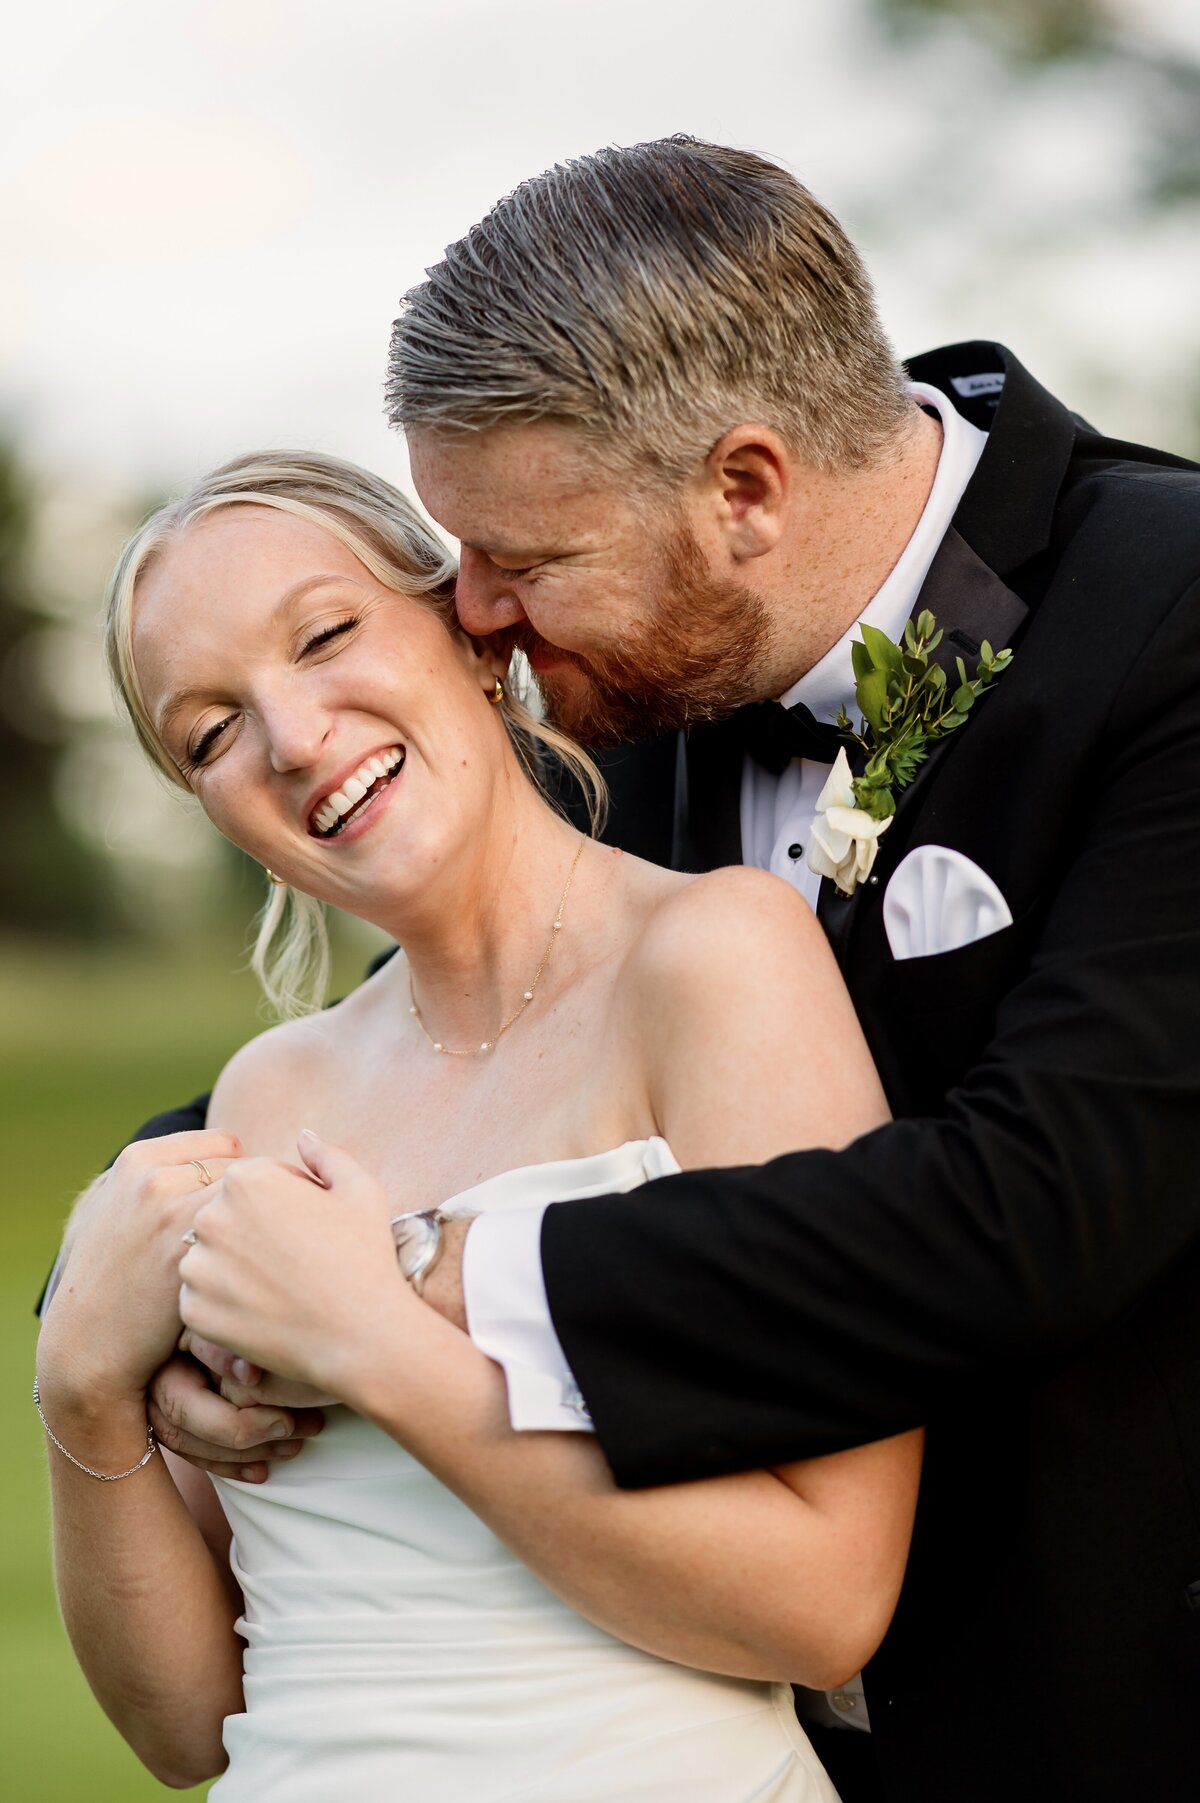 A groom embraces and kisses the cheek of a smiling bride outdoors on their wedding day. Both are dressed formally, with the groom in a black tuxedo and the bride in a white strapless dress.